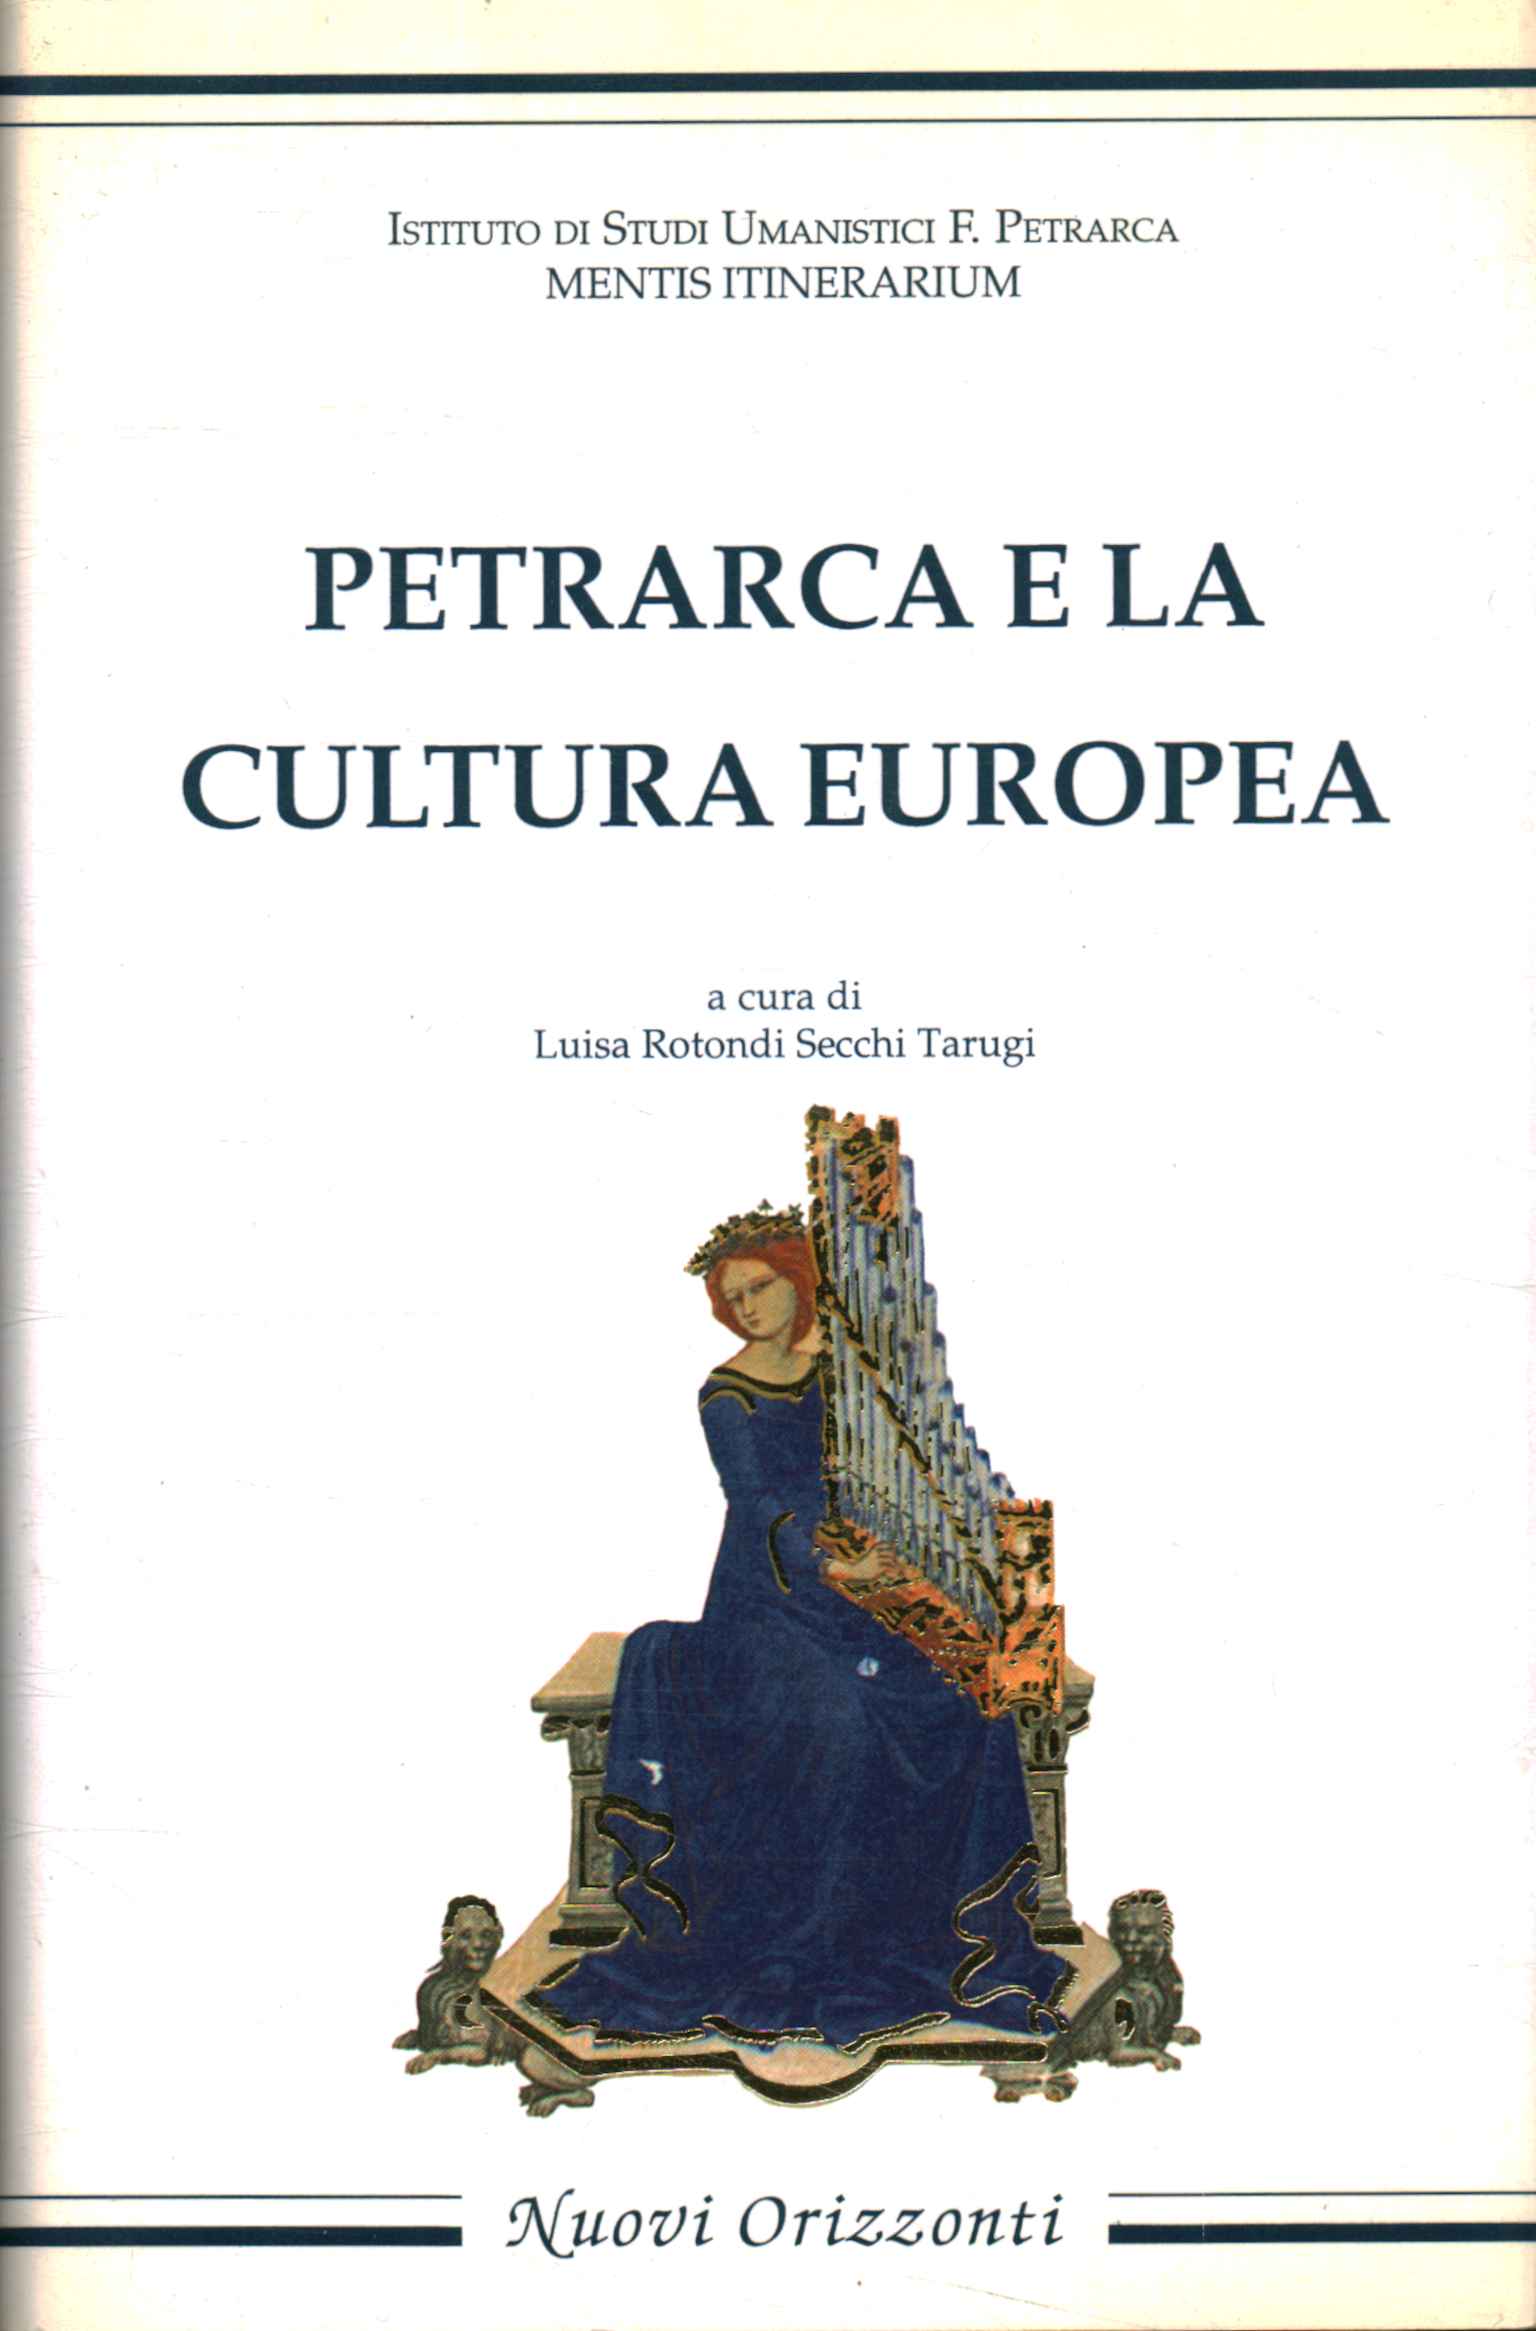 Petrarch and European culture